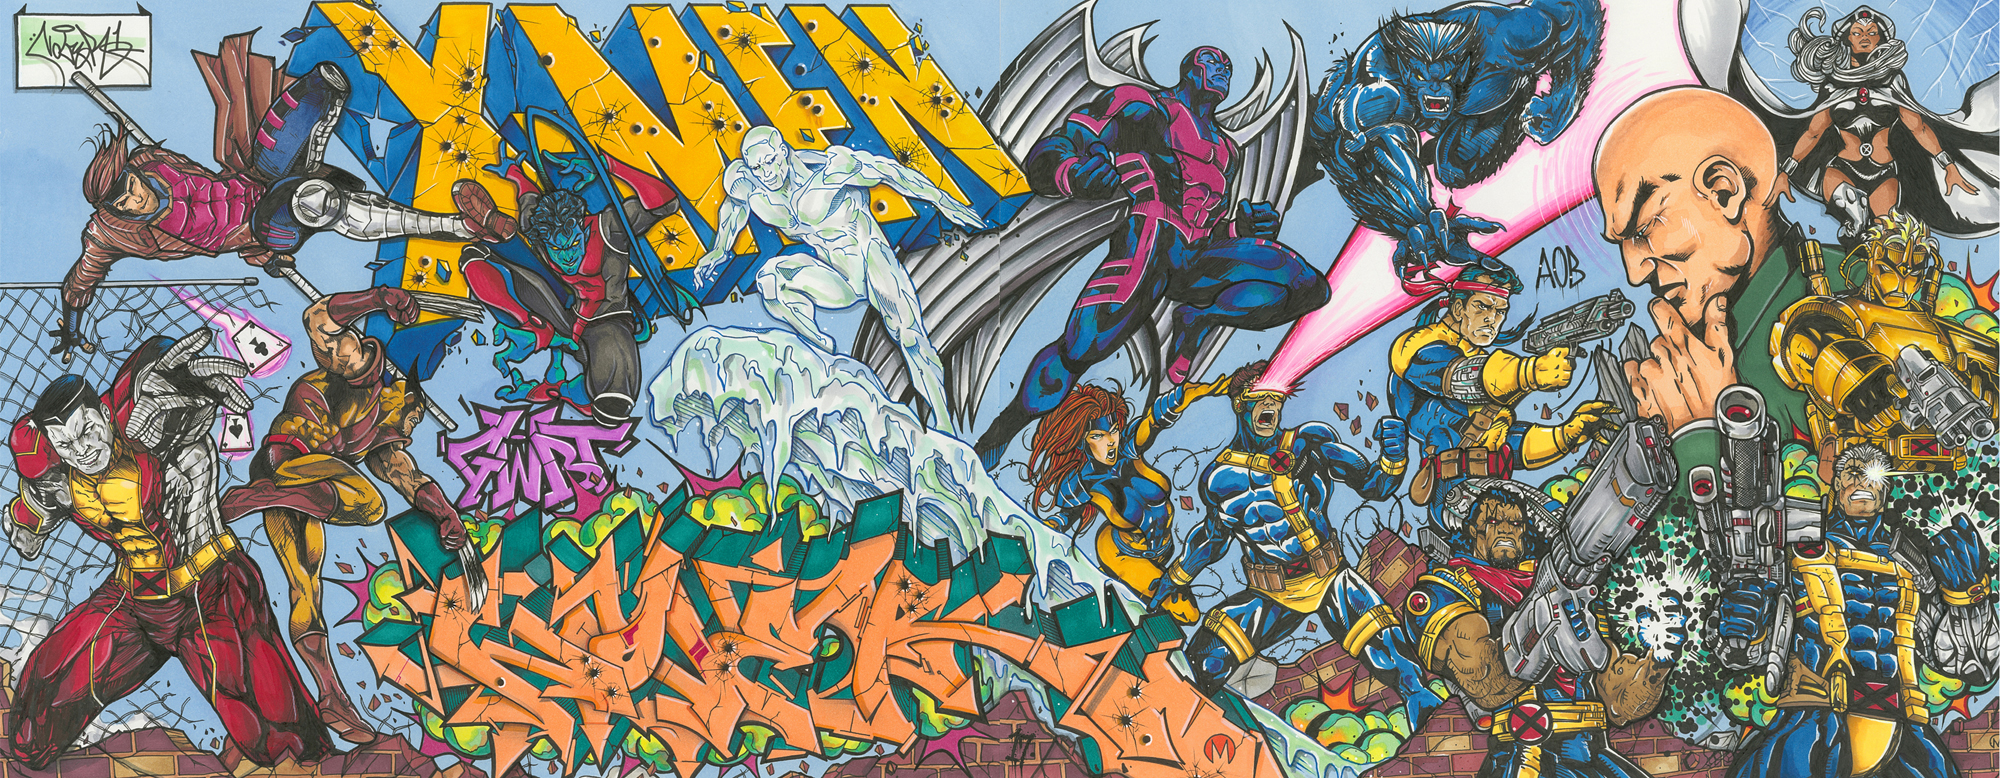 X-Men Heroes by Nover, Markers & Pen on Paper, 2018.